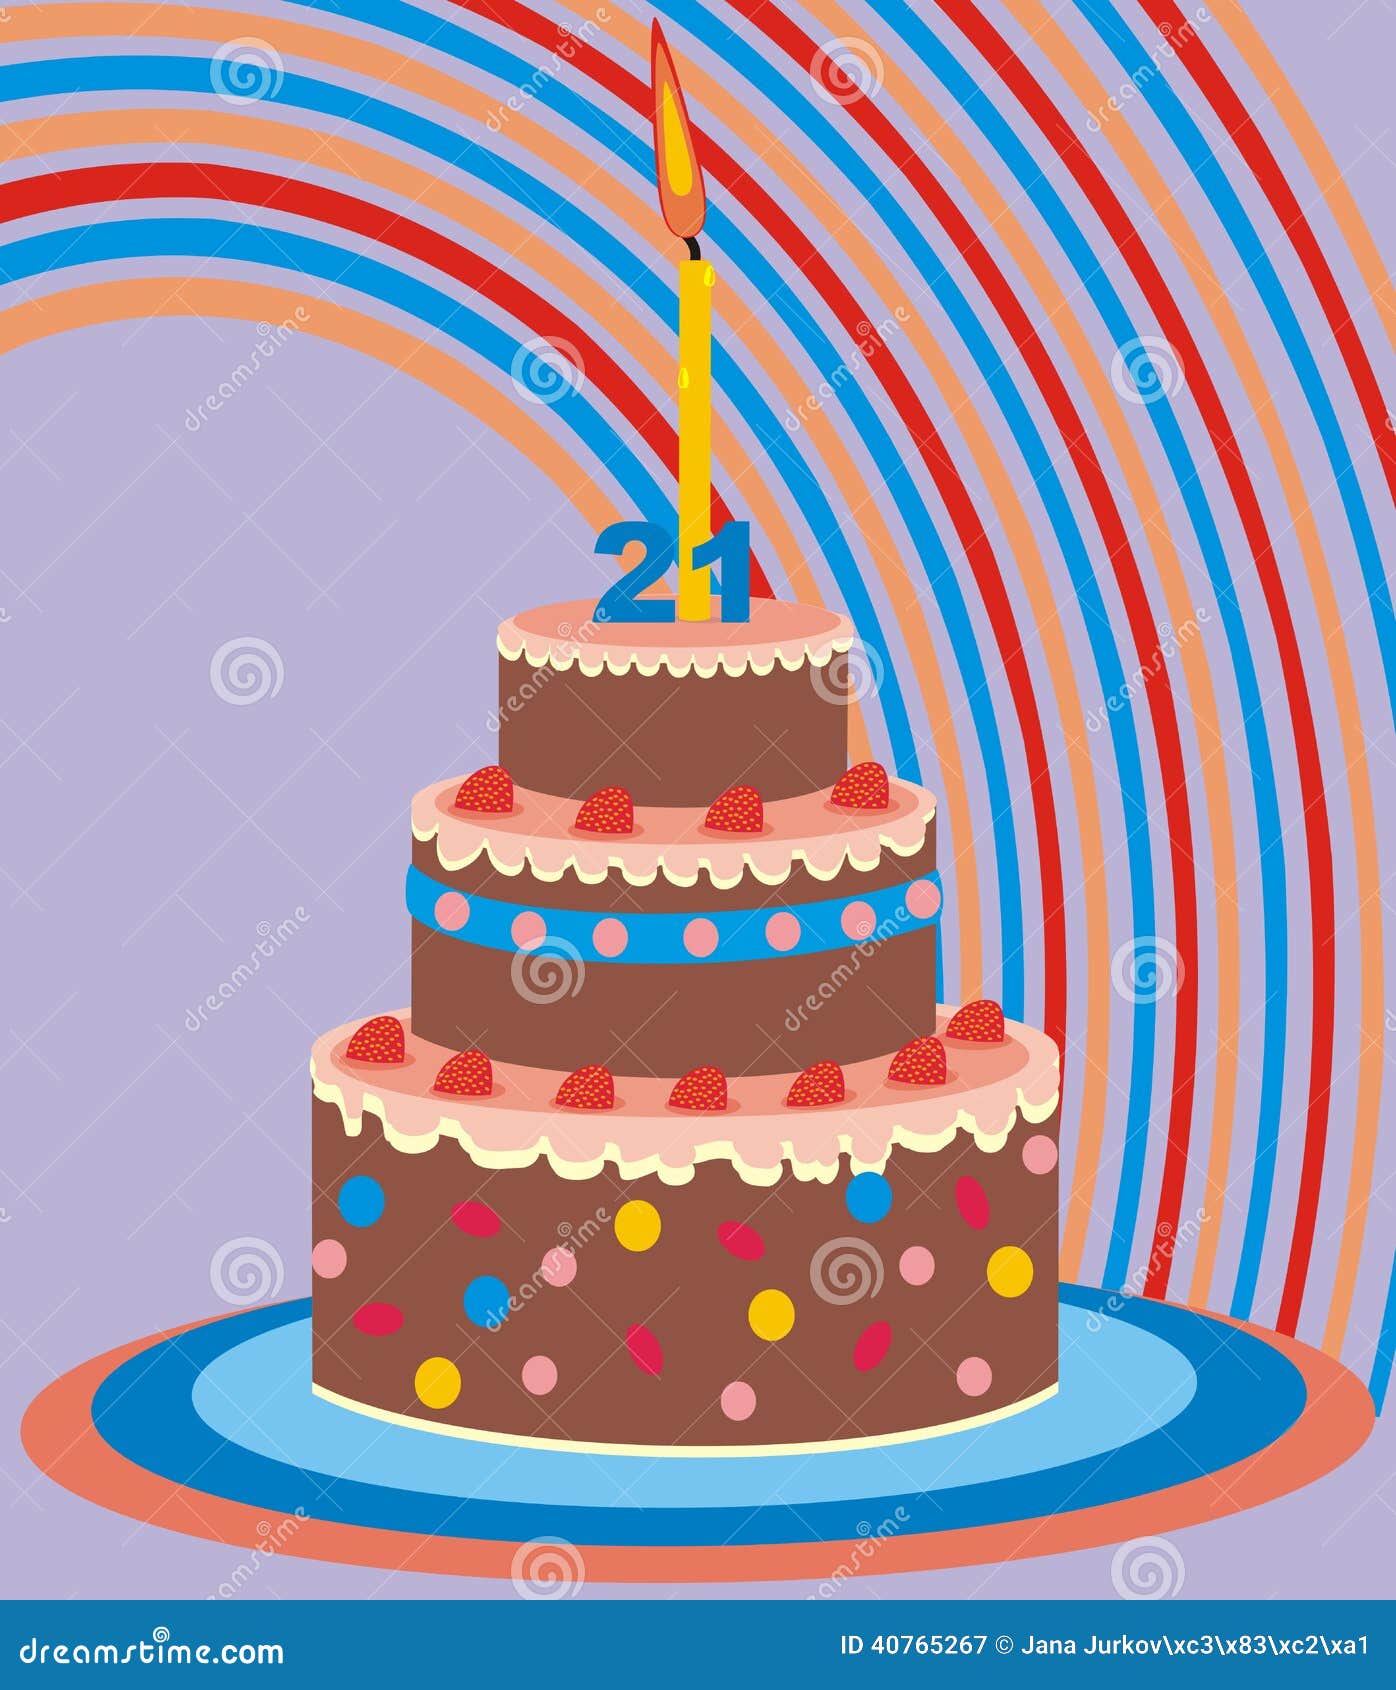 Cake 21 years stock vector. Illustration of cook, icon - 40765267